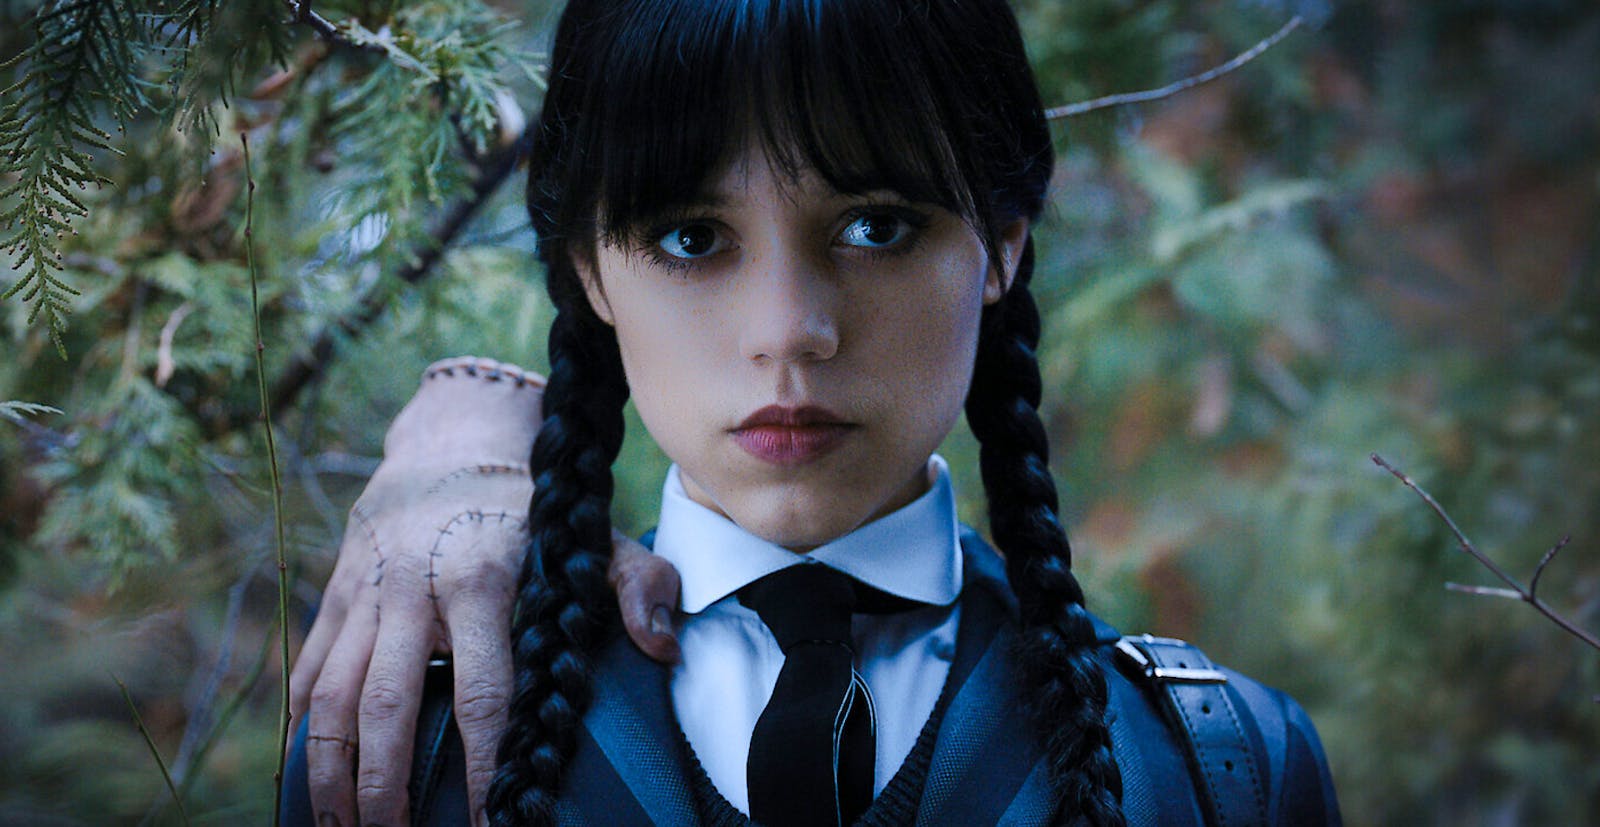 Wednesday': Addams Family themed show is great at horror comedy